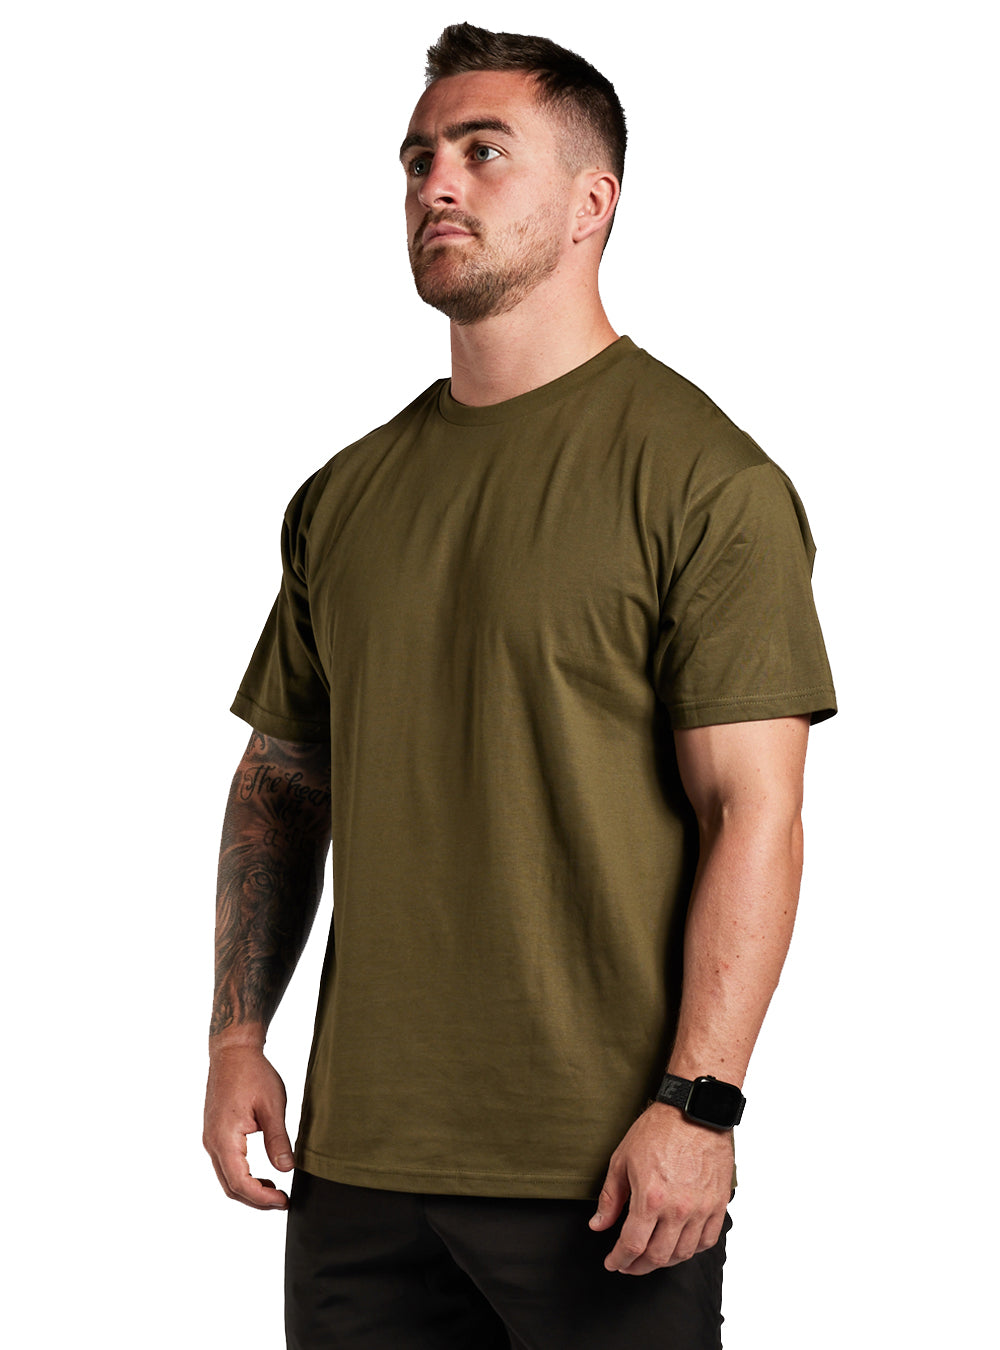 TacSource 100% Cotton Loose Fit Undergear Tee - 2 x Pack - Olive - TacSource